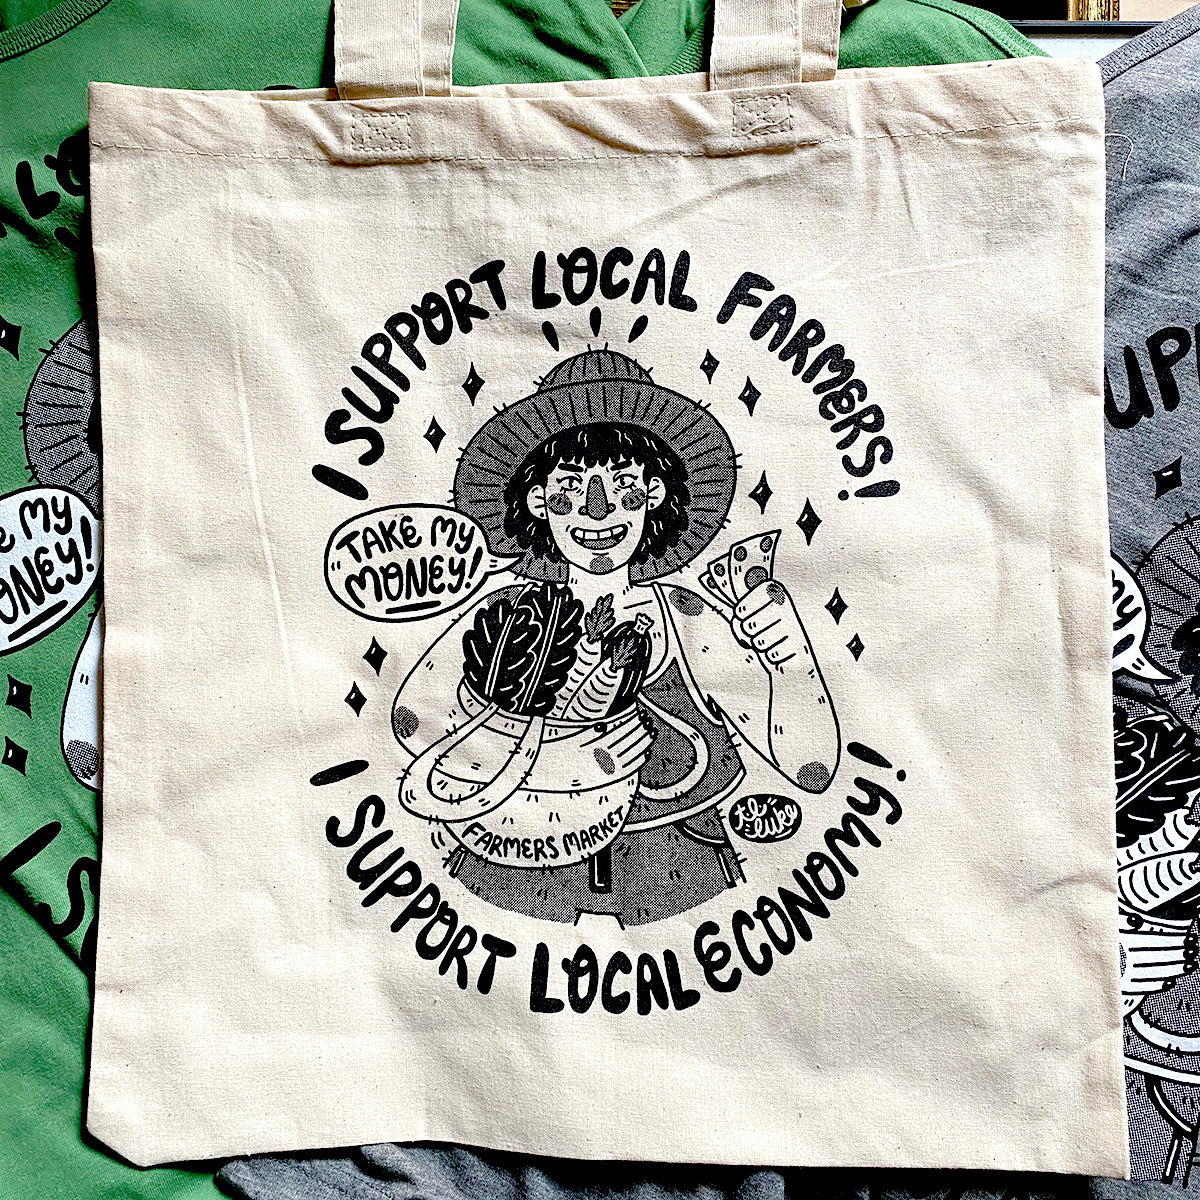 Support Local Tote